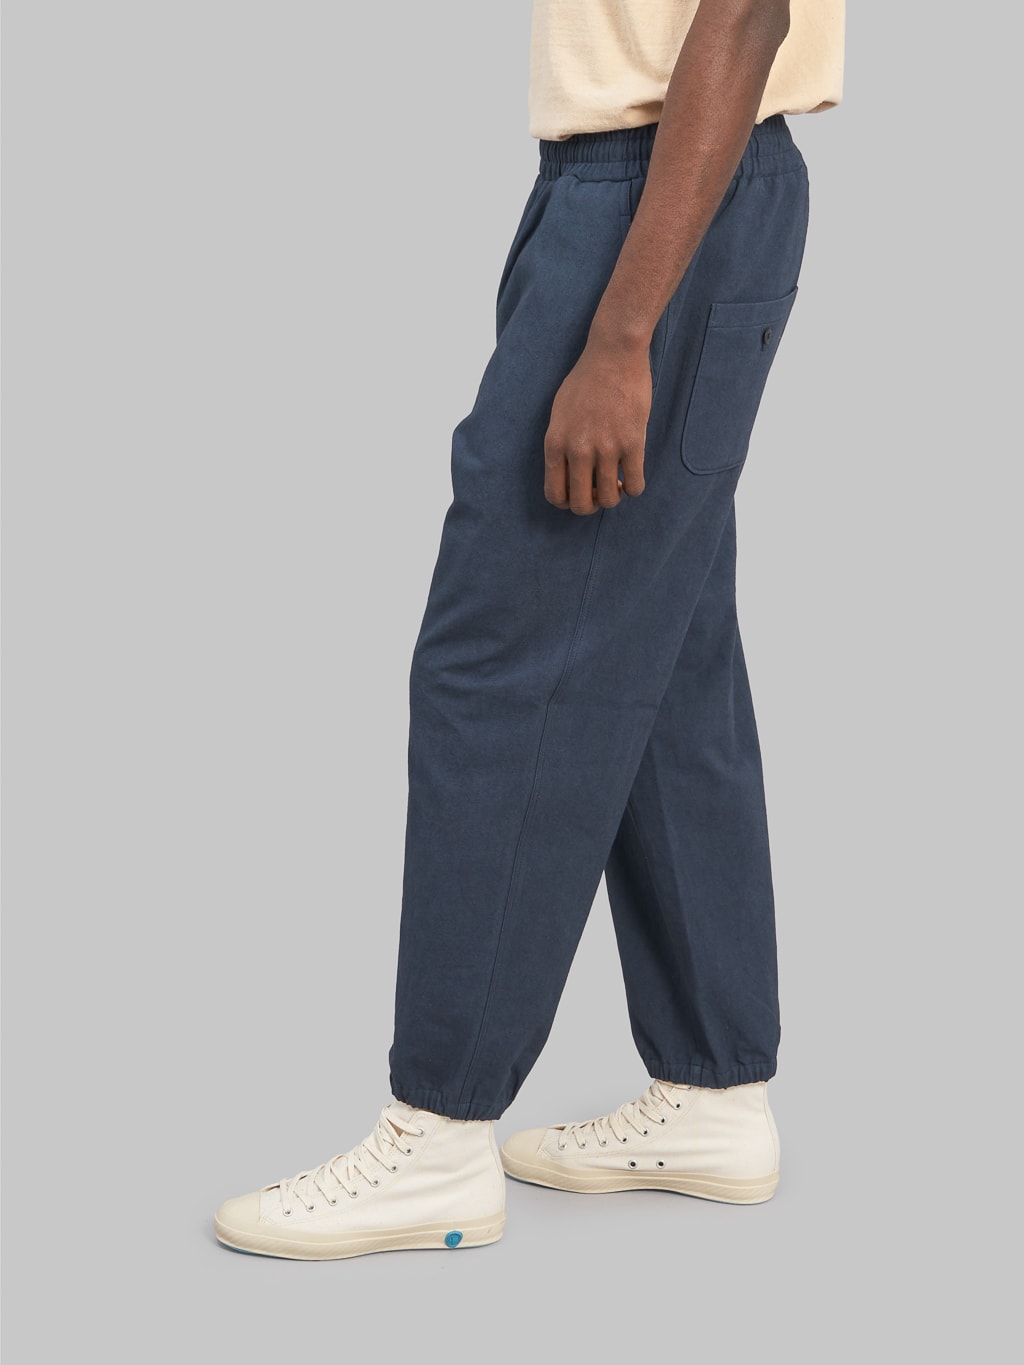 Jackman Canvas Rookie Pants Navy sulfur dyed style